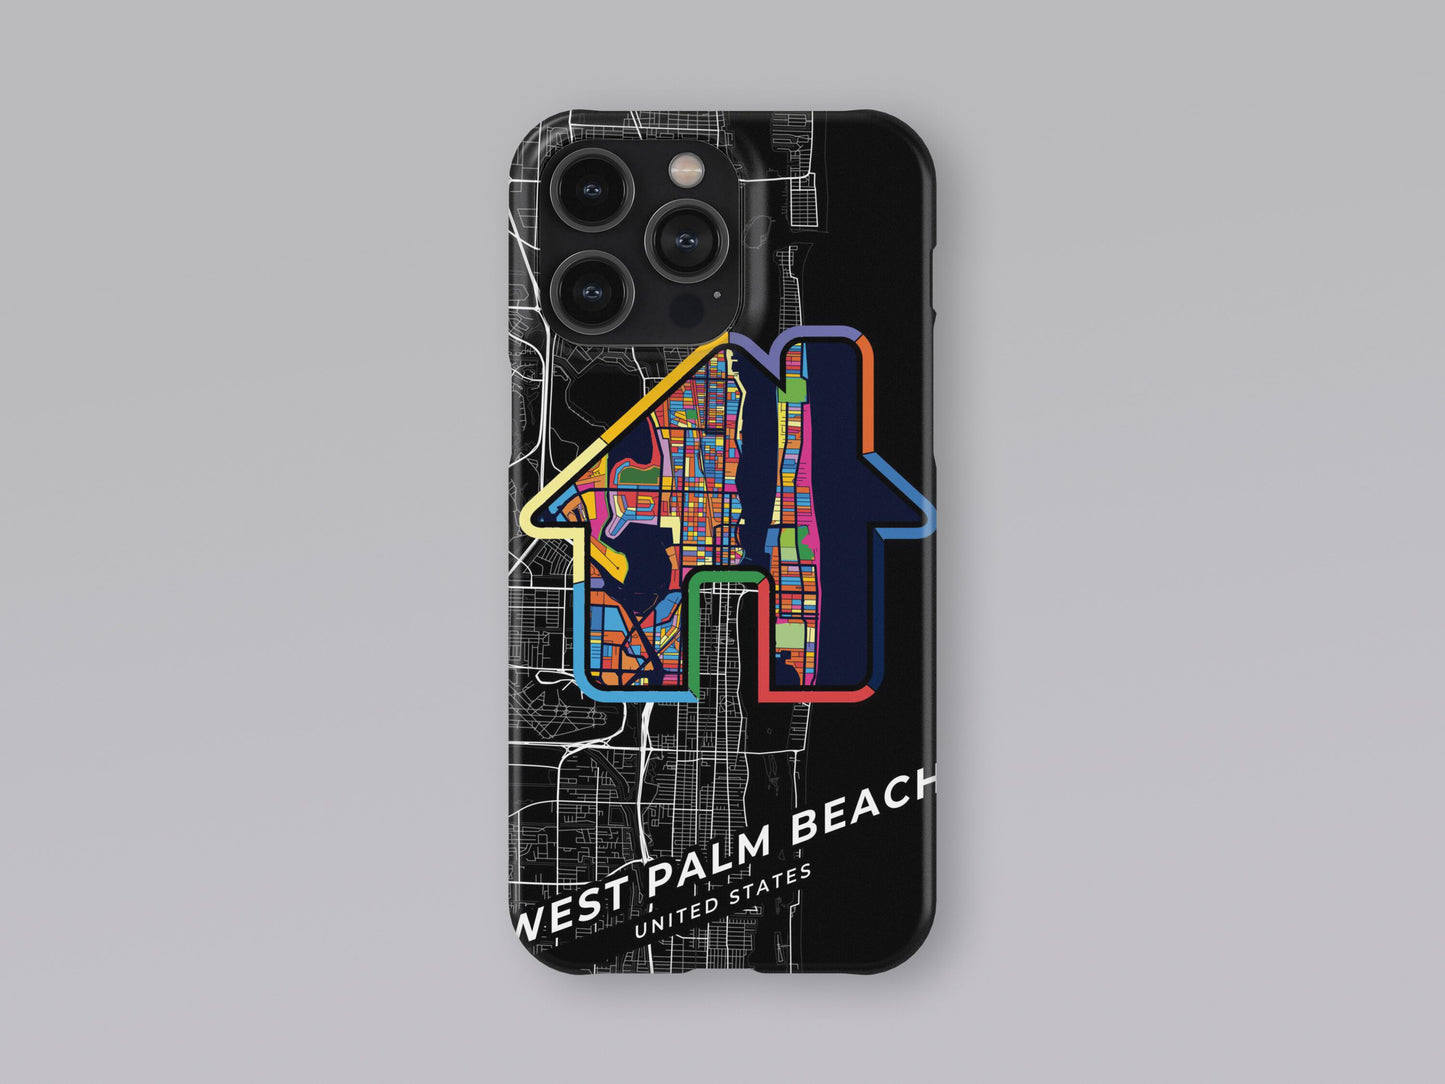 West Palm Beach Florida slim phone case with colorful icon 3